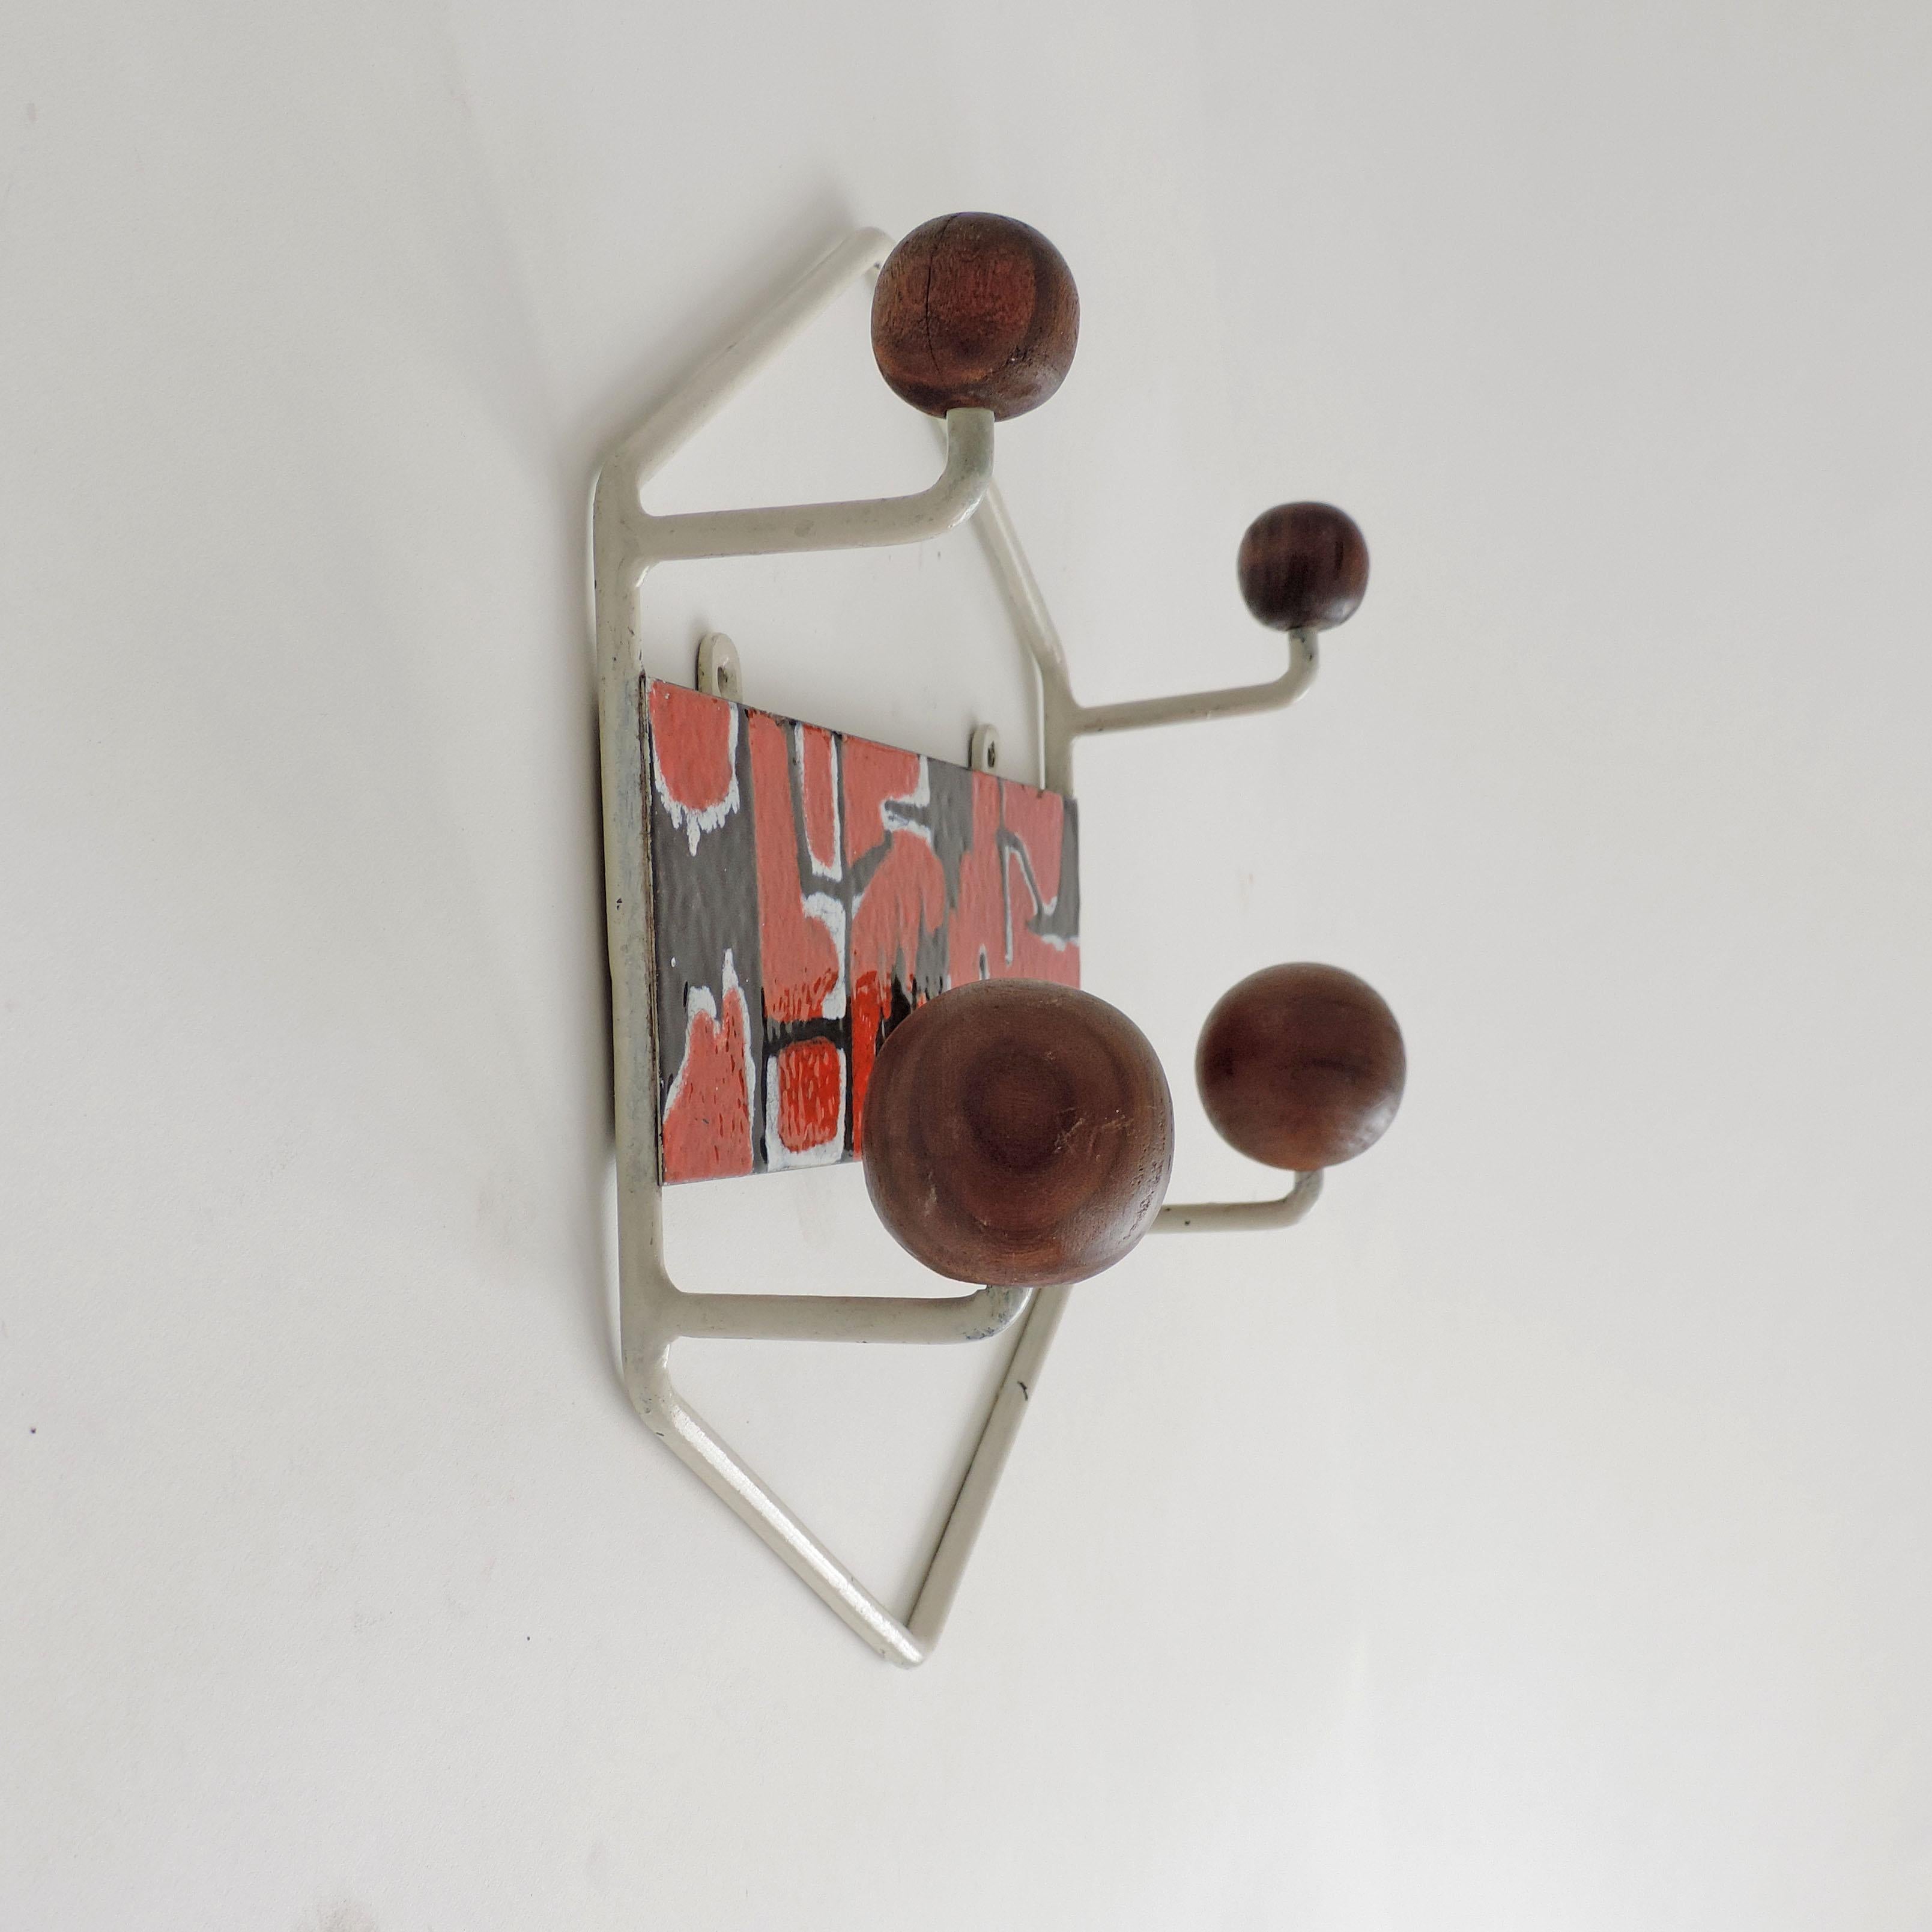 Italian Enamel Decorated Wall Coat Hanger, 1960s In Good Condition For Sale In Milan, IT